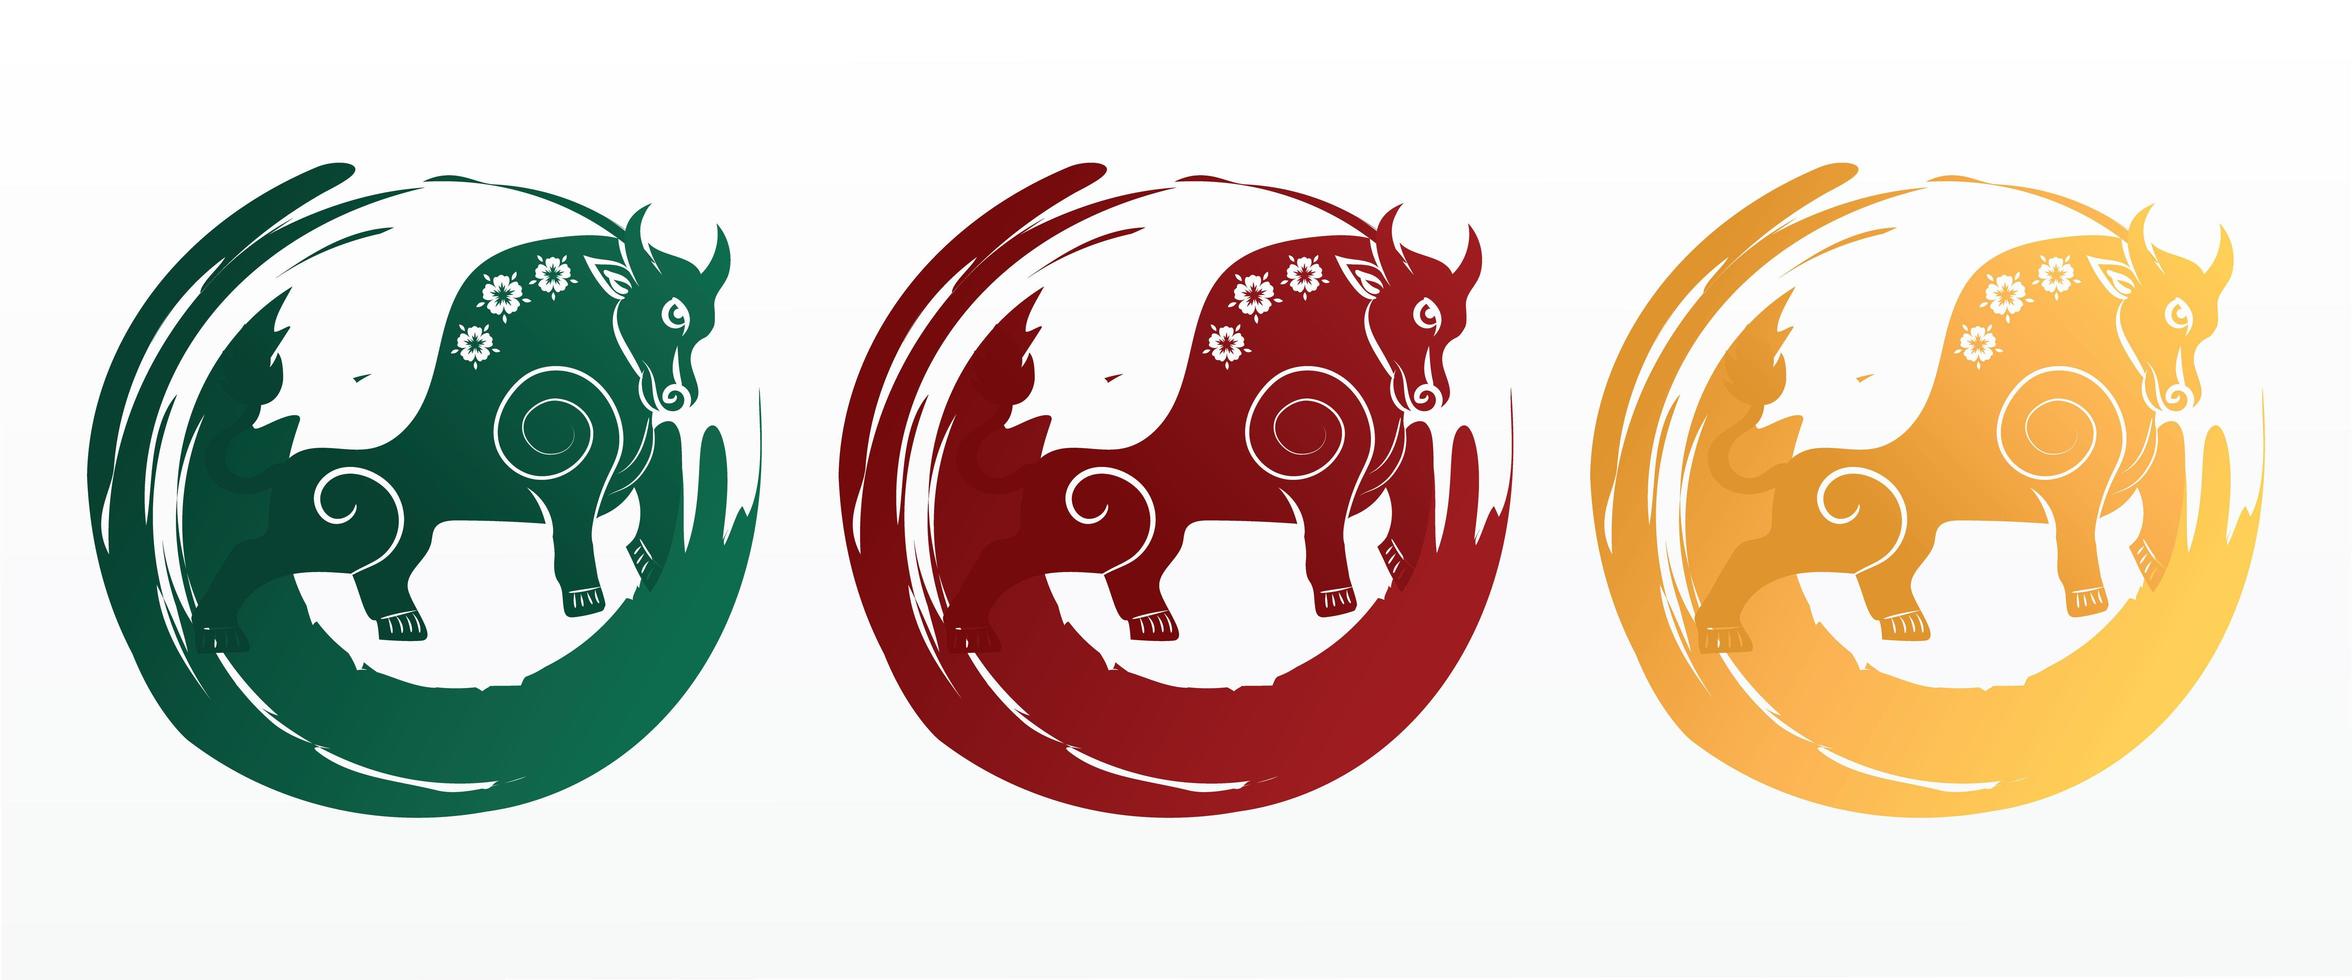 Chinese new year Ox symbol. Year of the ox character,flower and asian elements with craft style vector